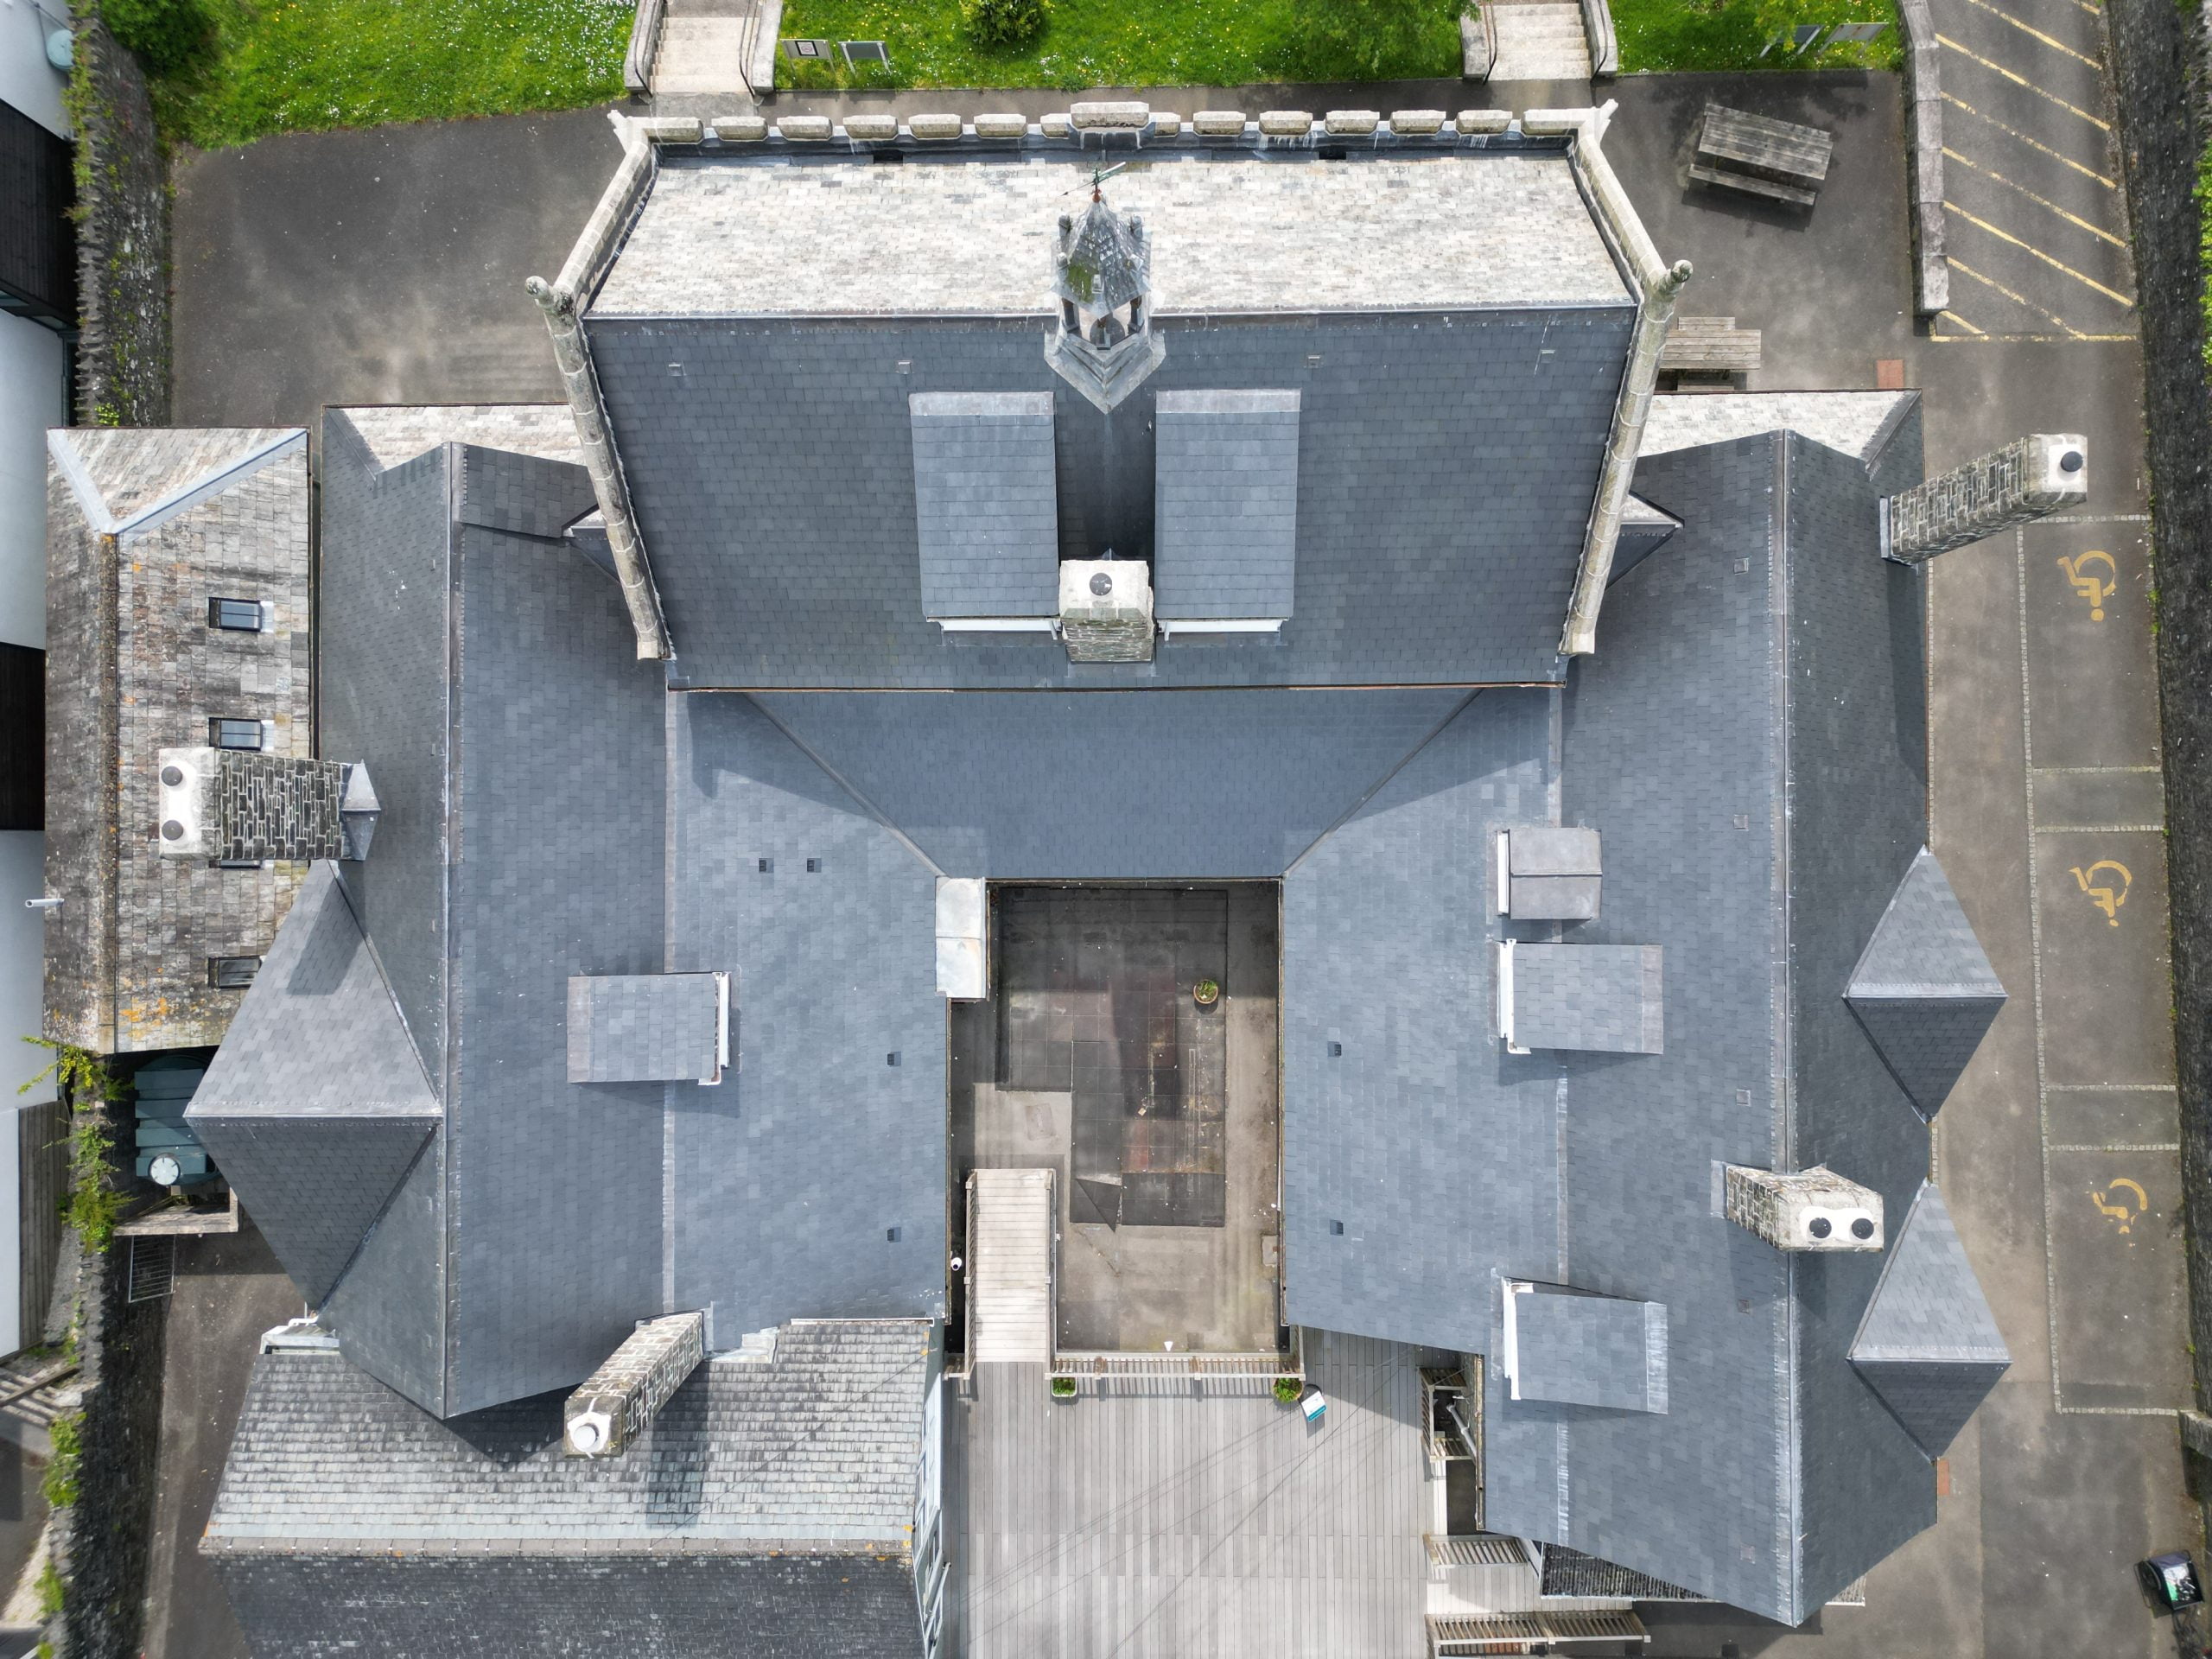 drone shot from a tiled roof